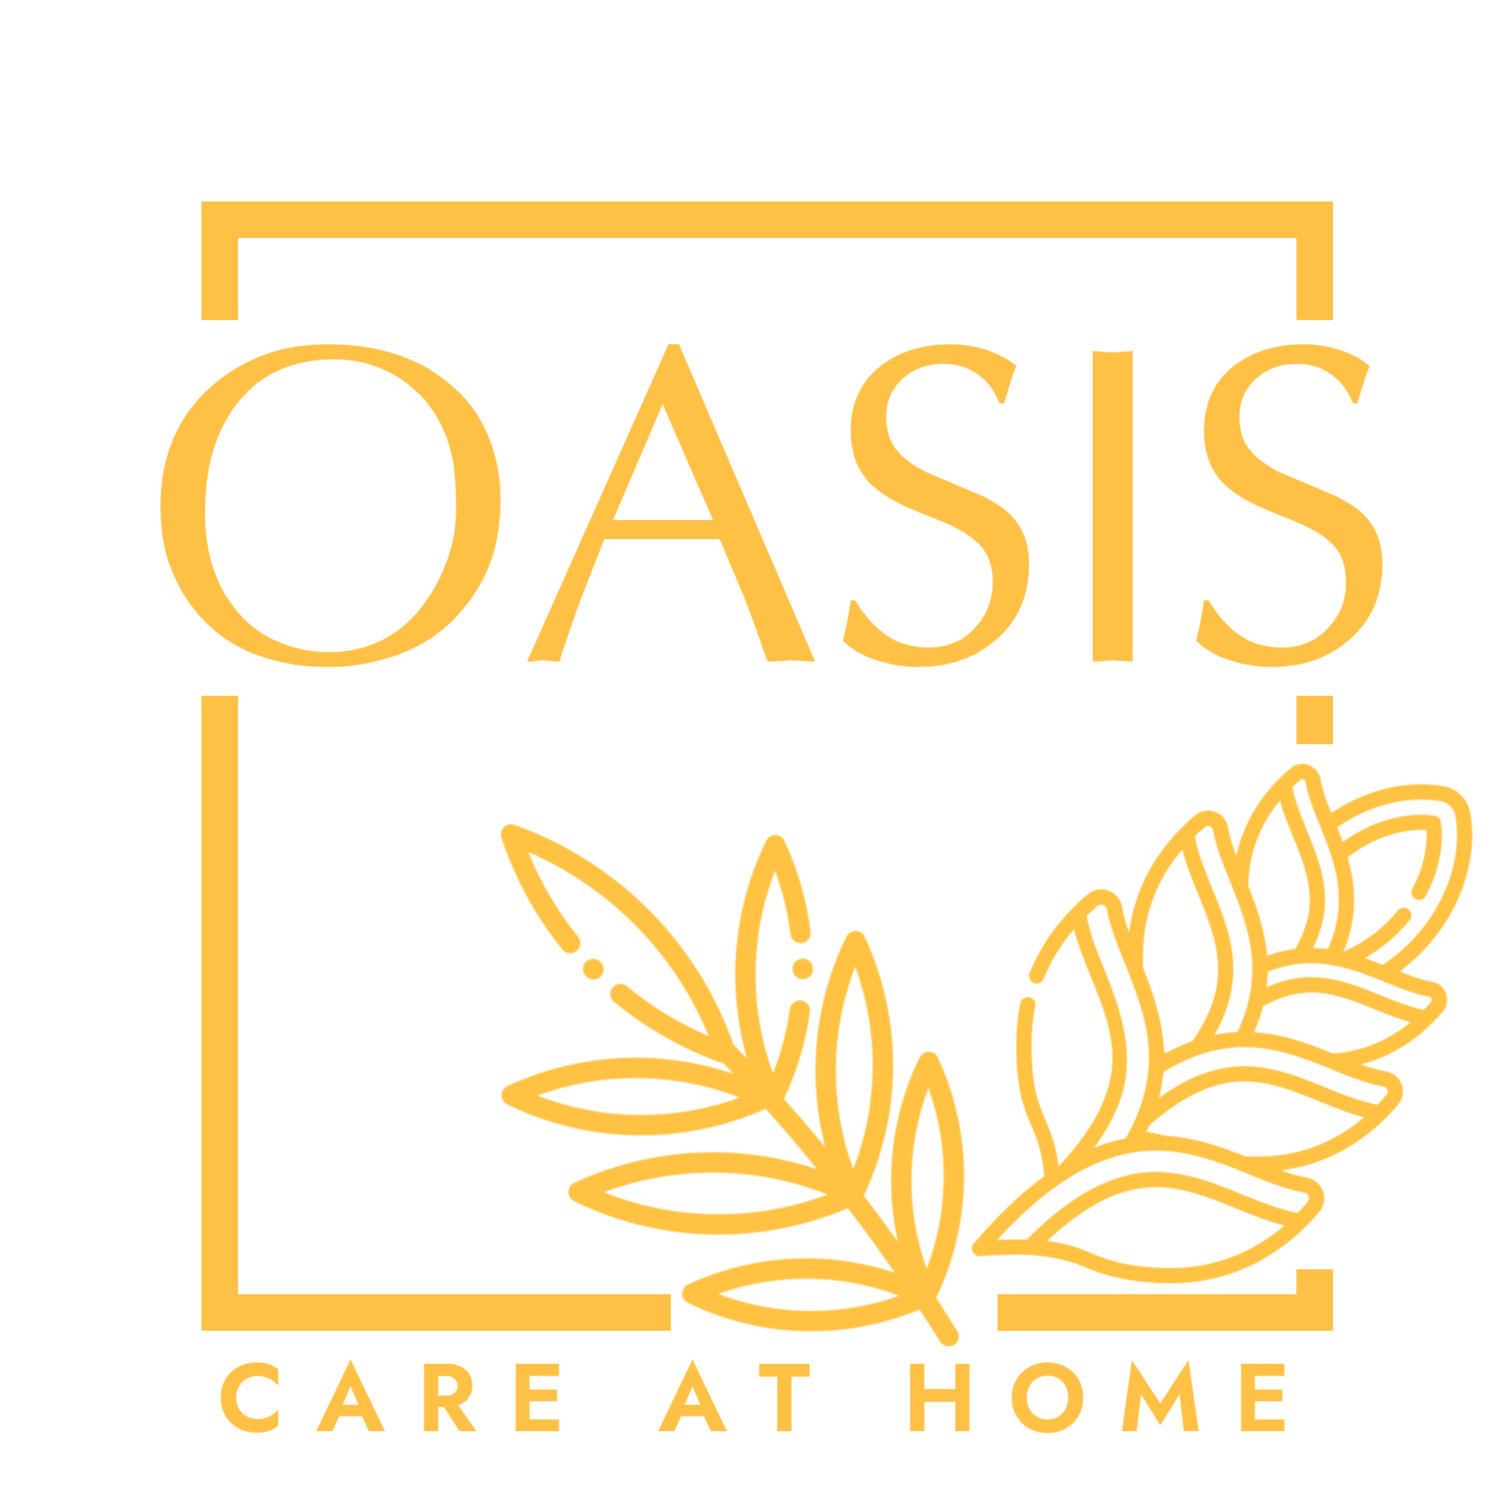 Oasis Healthcare